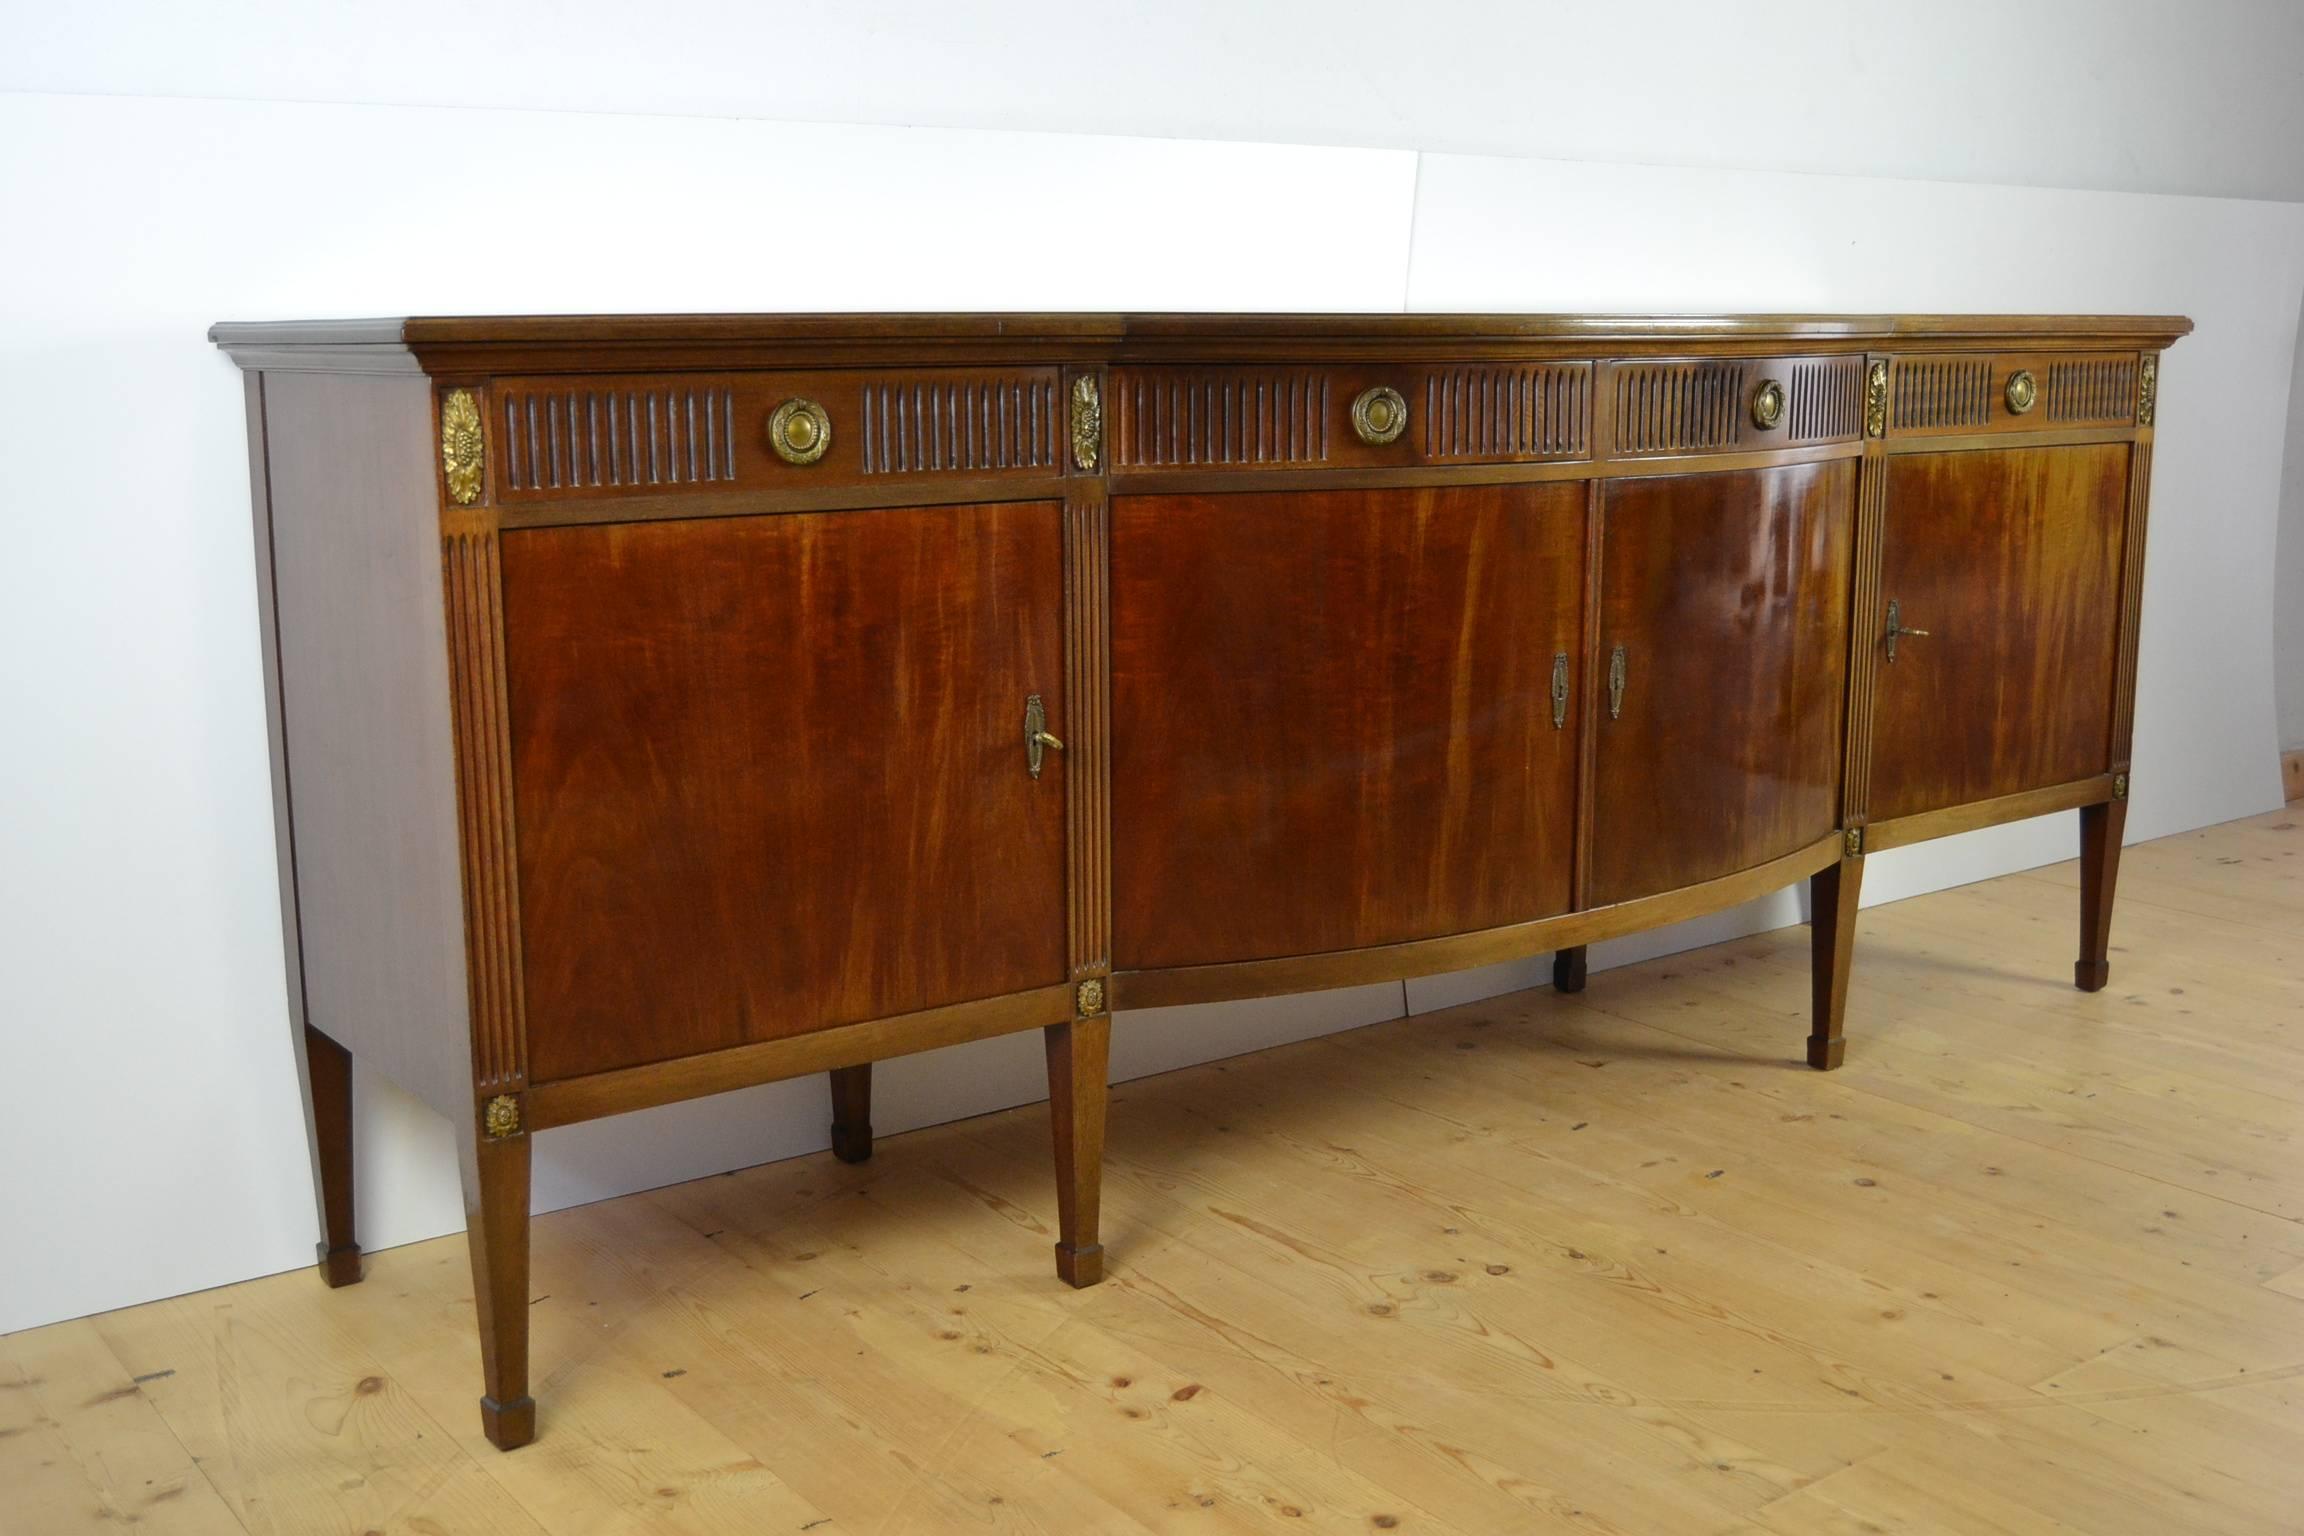 Beautiful large credenza sideboard commode Louis XVI style made in the manner of Jansen. 
Nice details with cast bronze hardware and beautiful rounded shape.